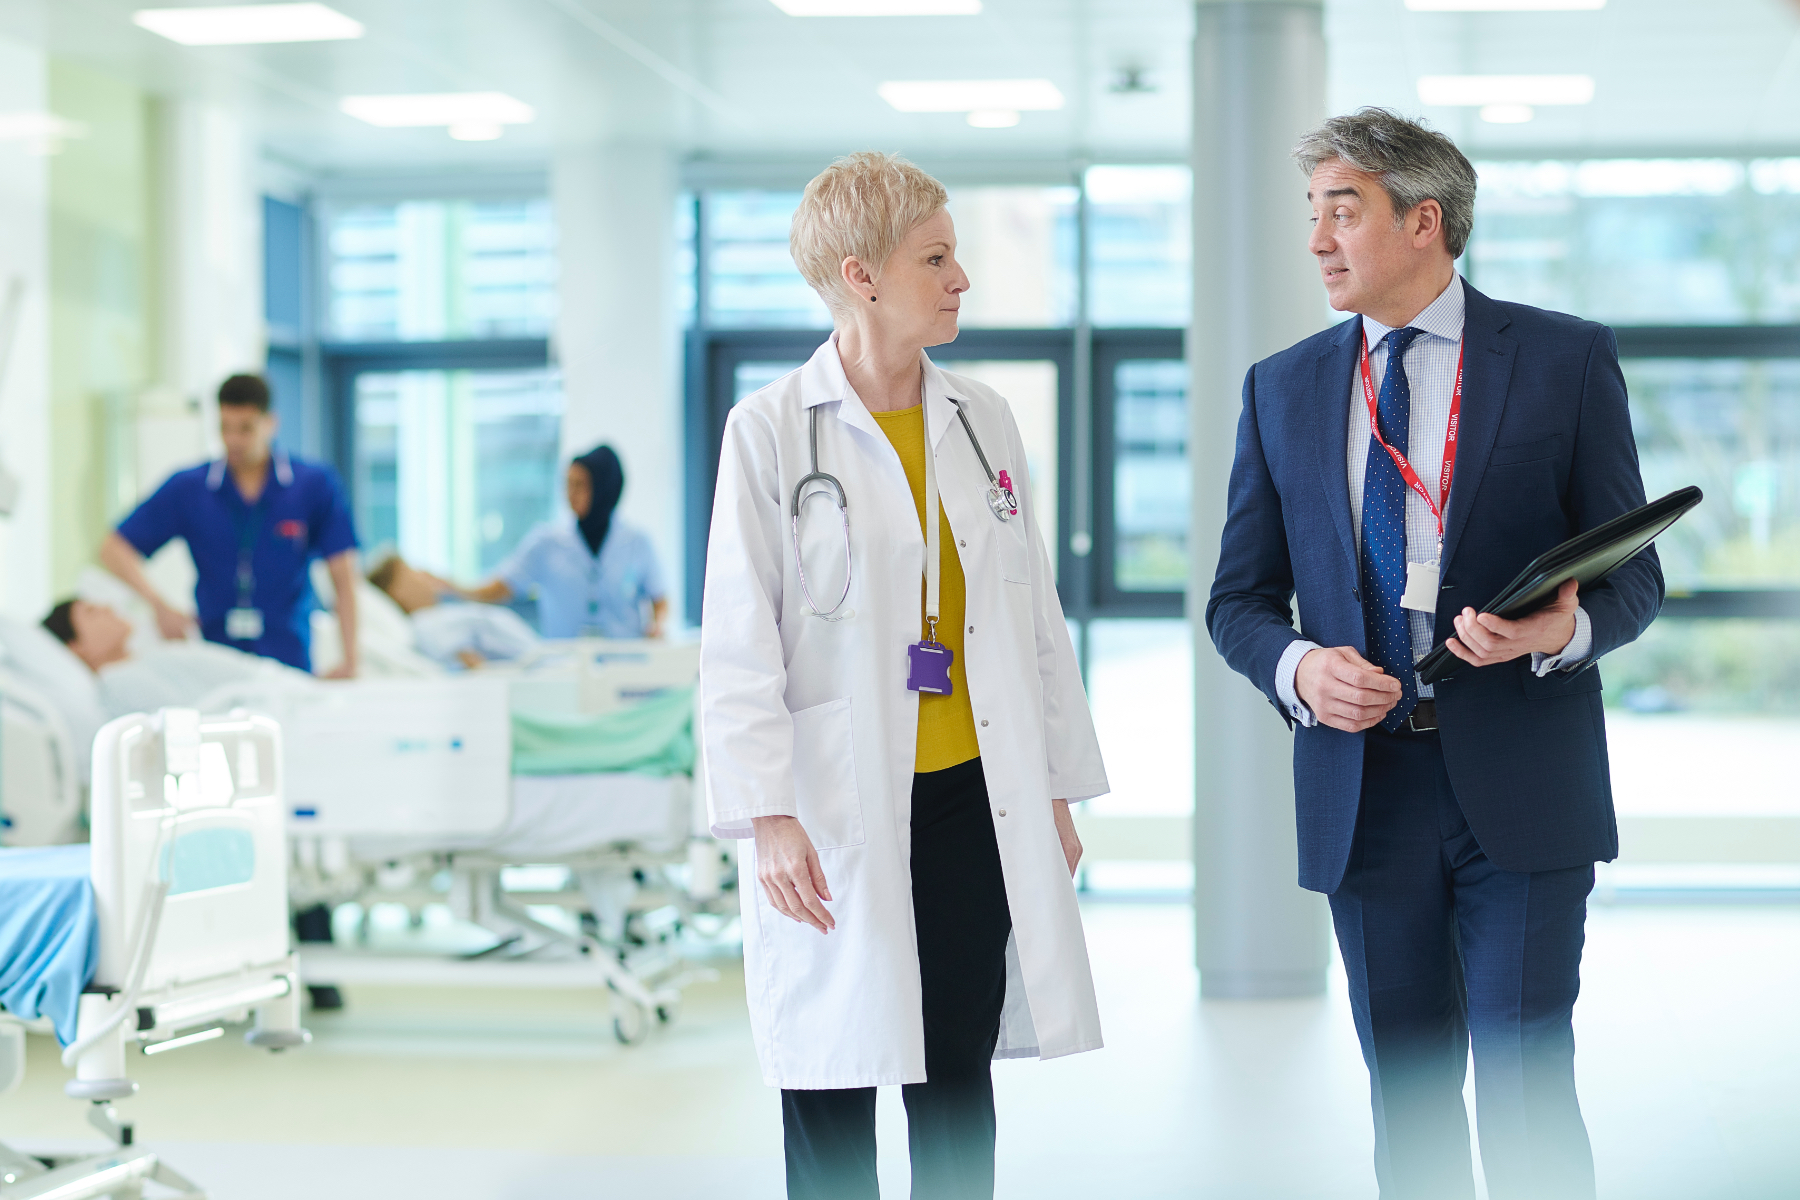 Image of a doctor and a businessman talking to each other while they walk through a hospital ward